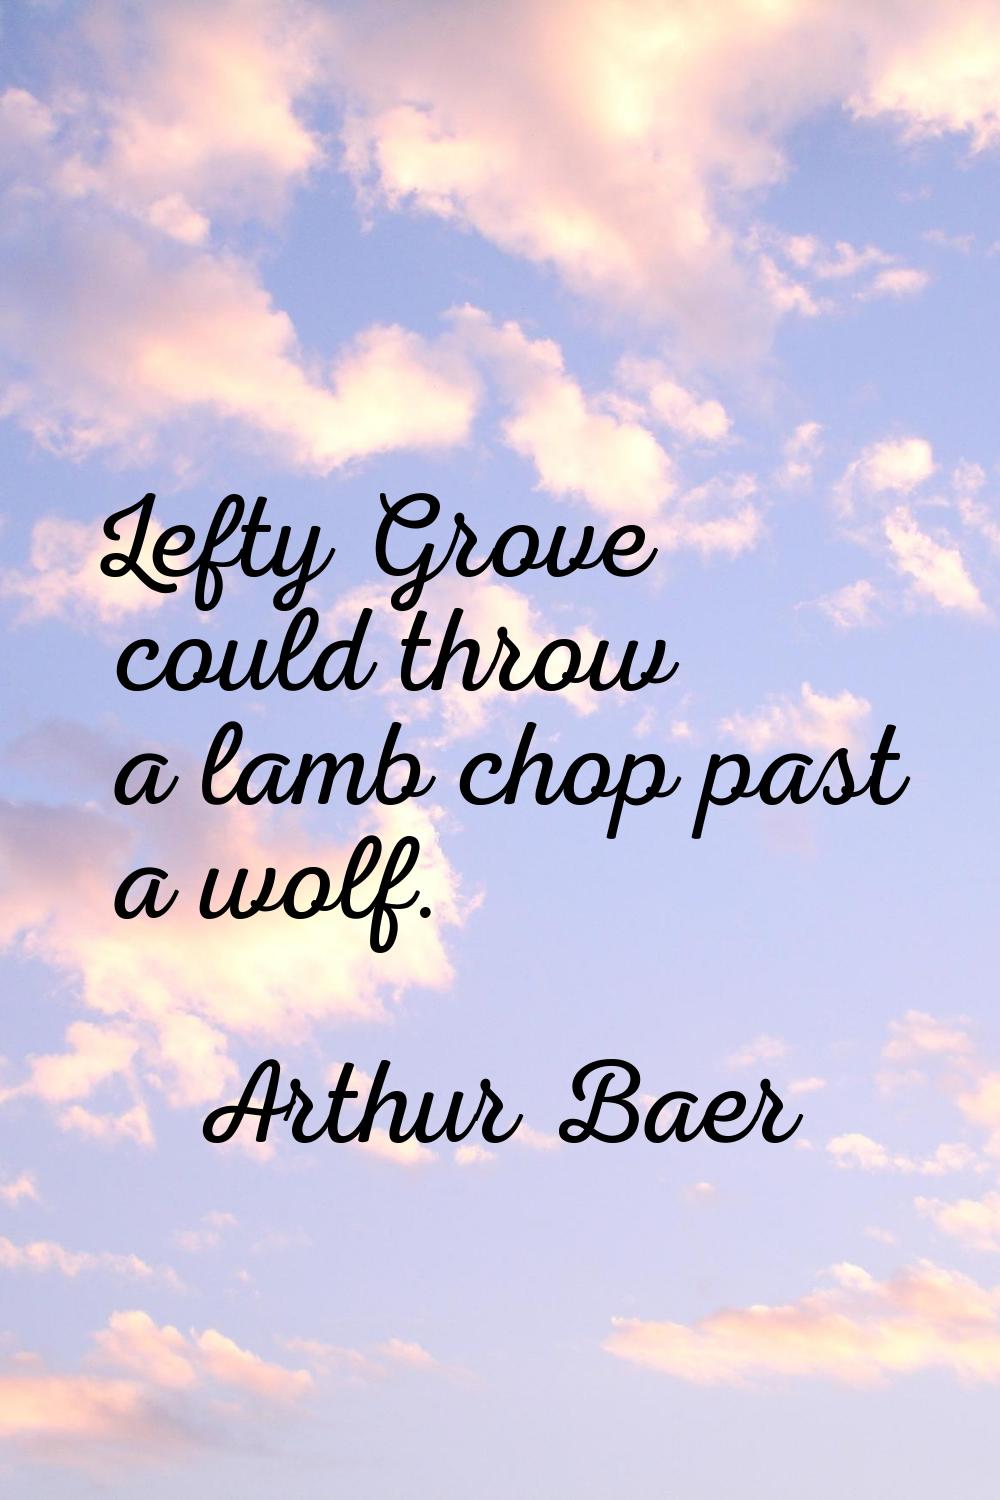 Lefty Grove could throw a lamb chop past a wolf.